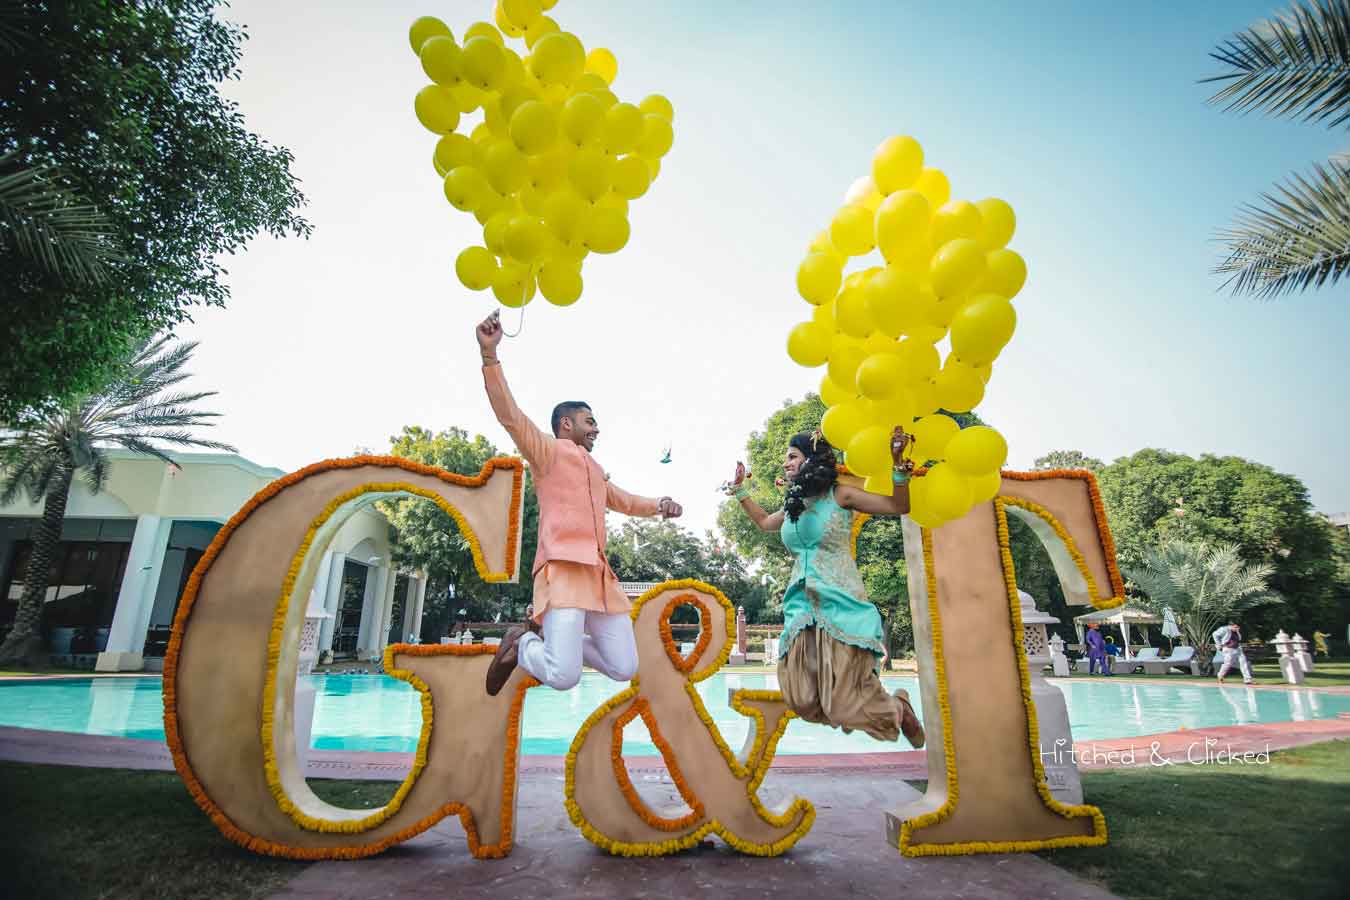 budget wedding decor, budget wedding decor ideas, balloon wedding decor, balloon decor ideas, couple with balloons